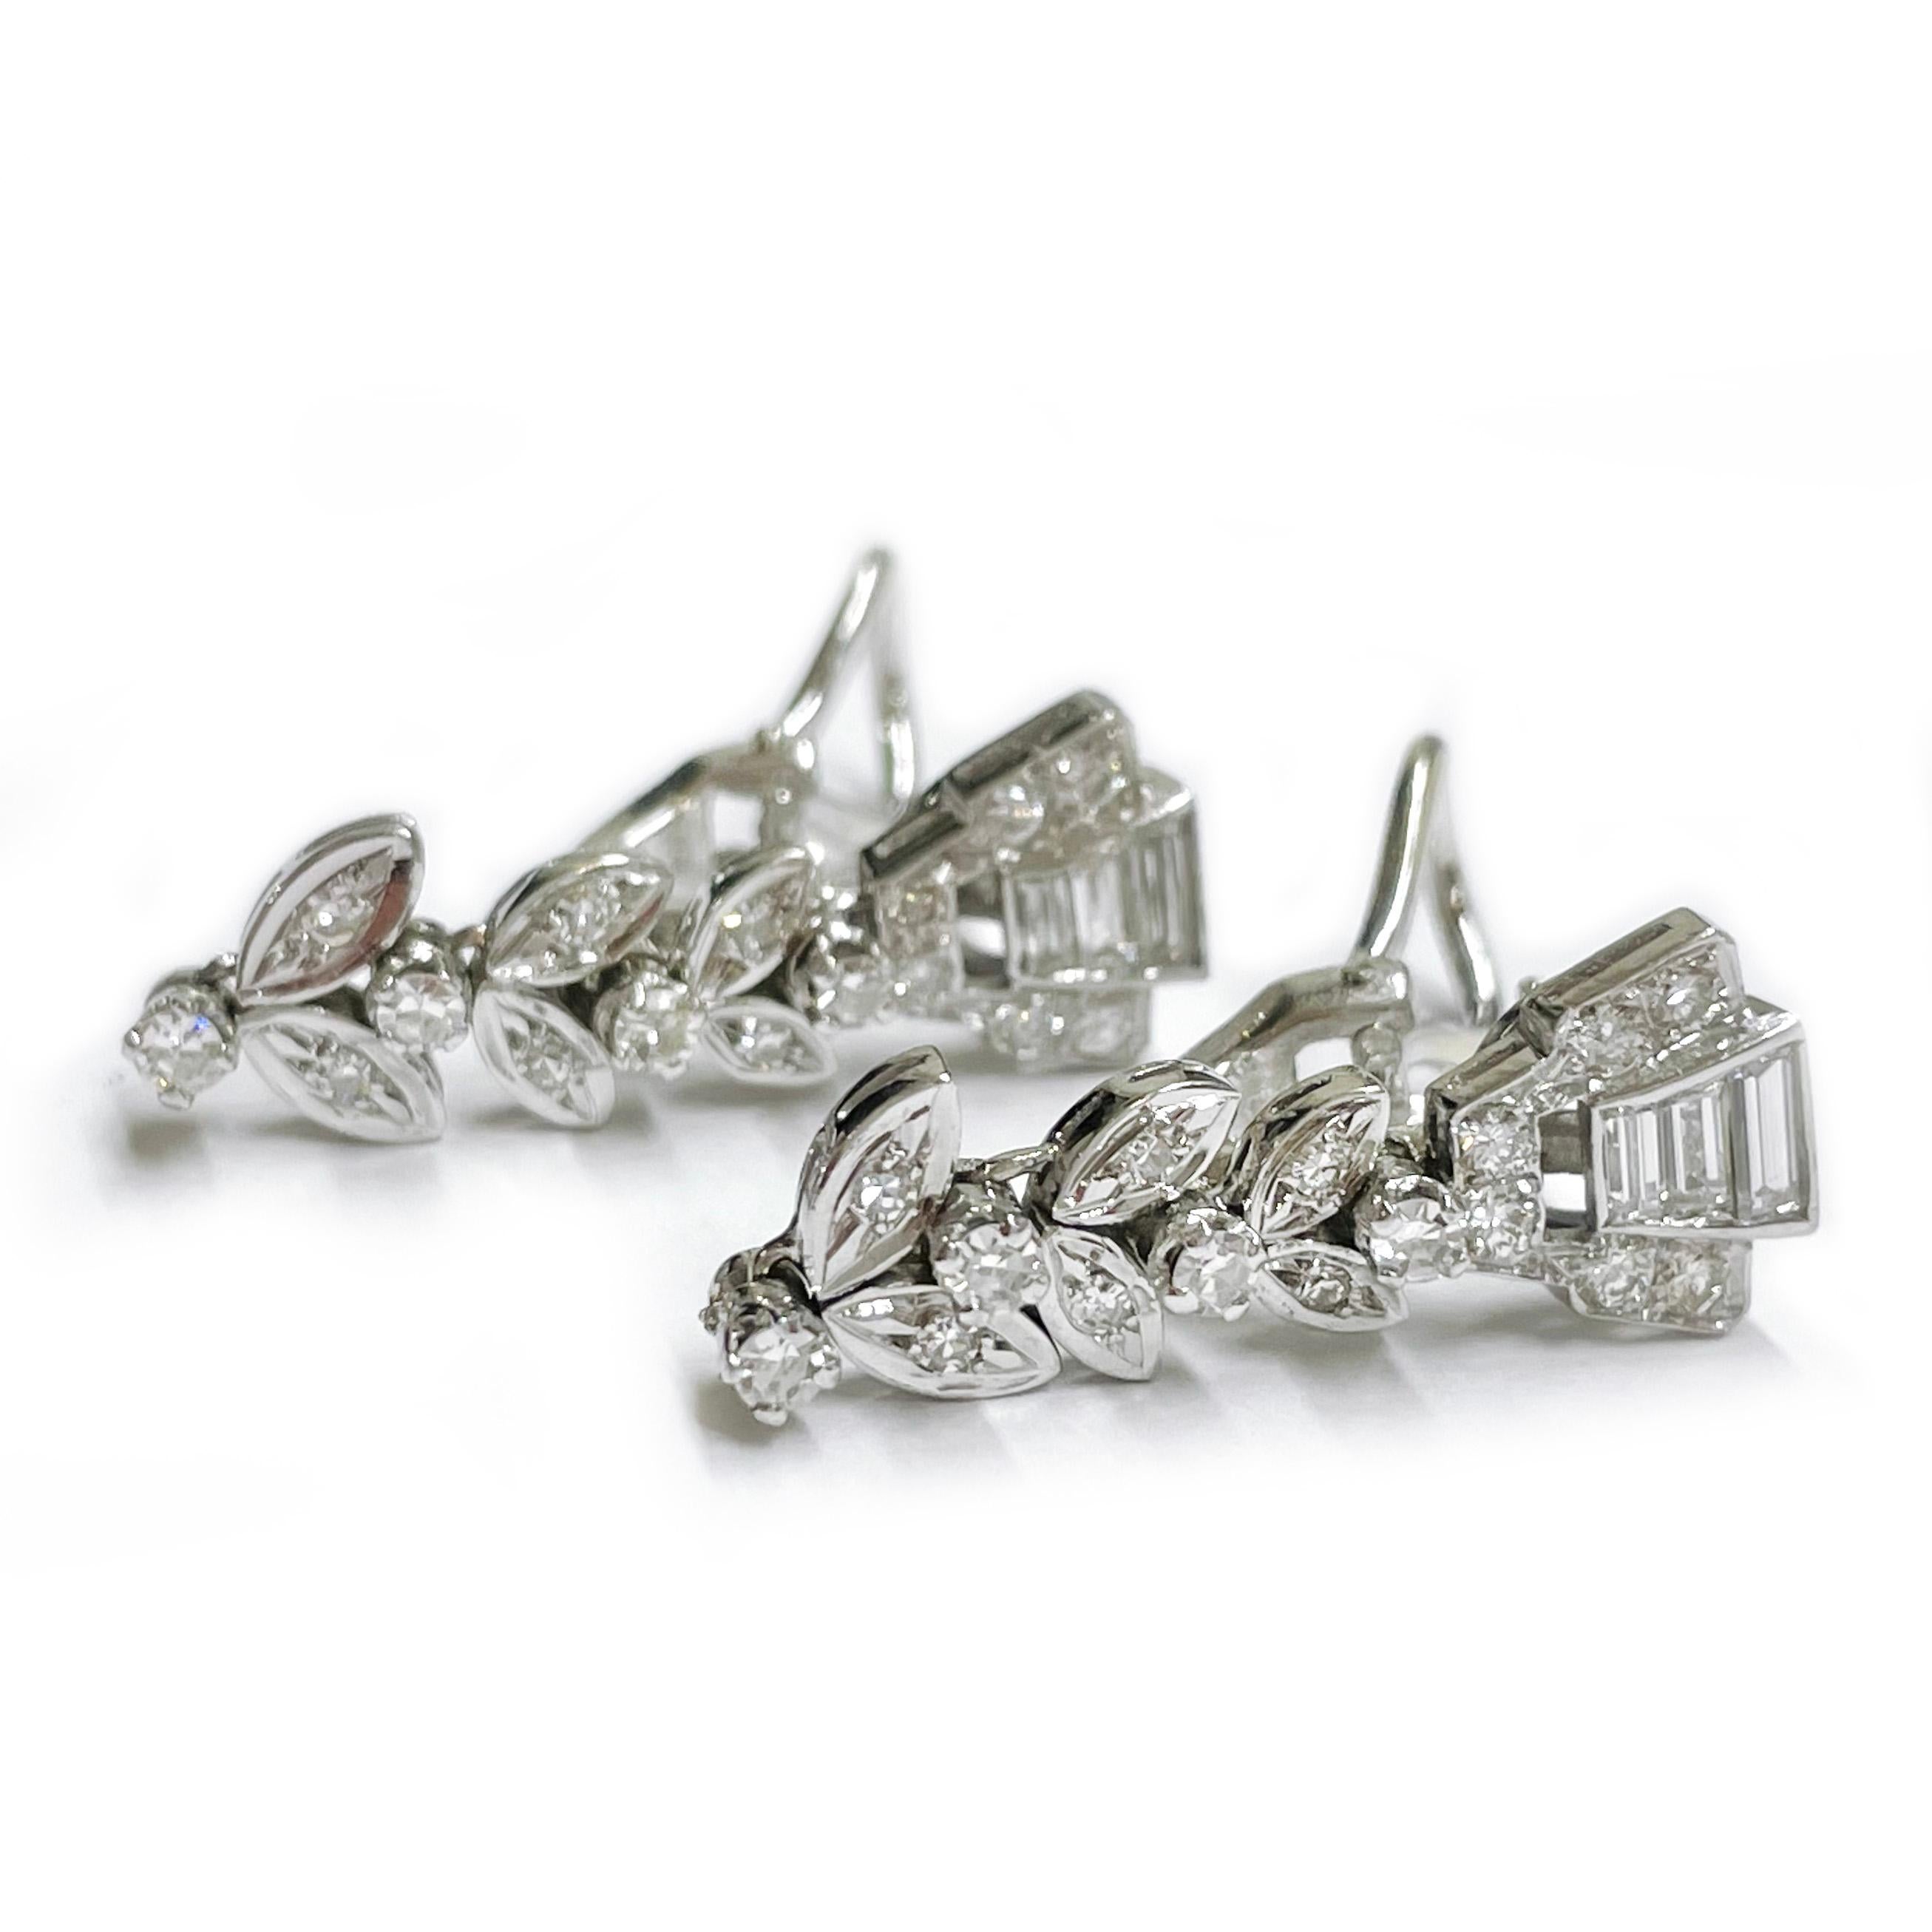 18 Karat White Gold Diamond Dangle Earrings. Each earring features three straight baguette-cut diamonds, twelve bead-set, and four prong-set round diamonds. In total there is two 3.5mm x 1.5mm, two 3.1mm x 1.5mm, and two 2.5mm x 1.5mm baguette